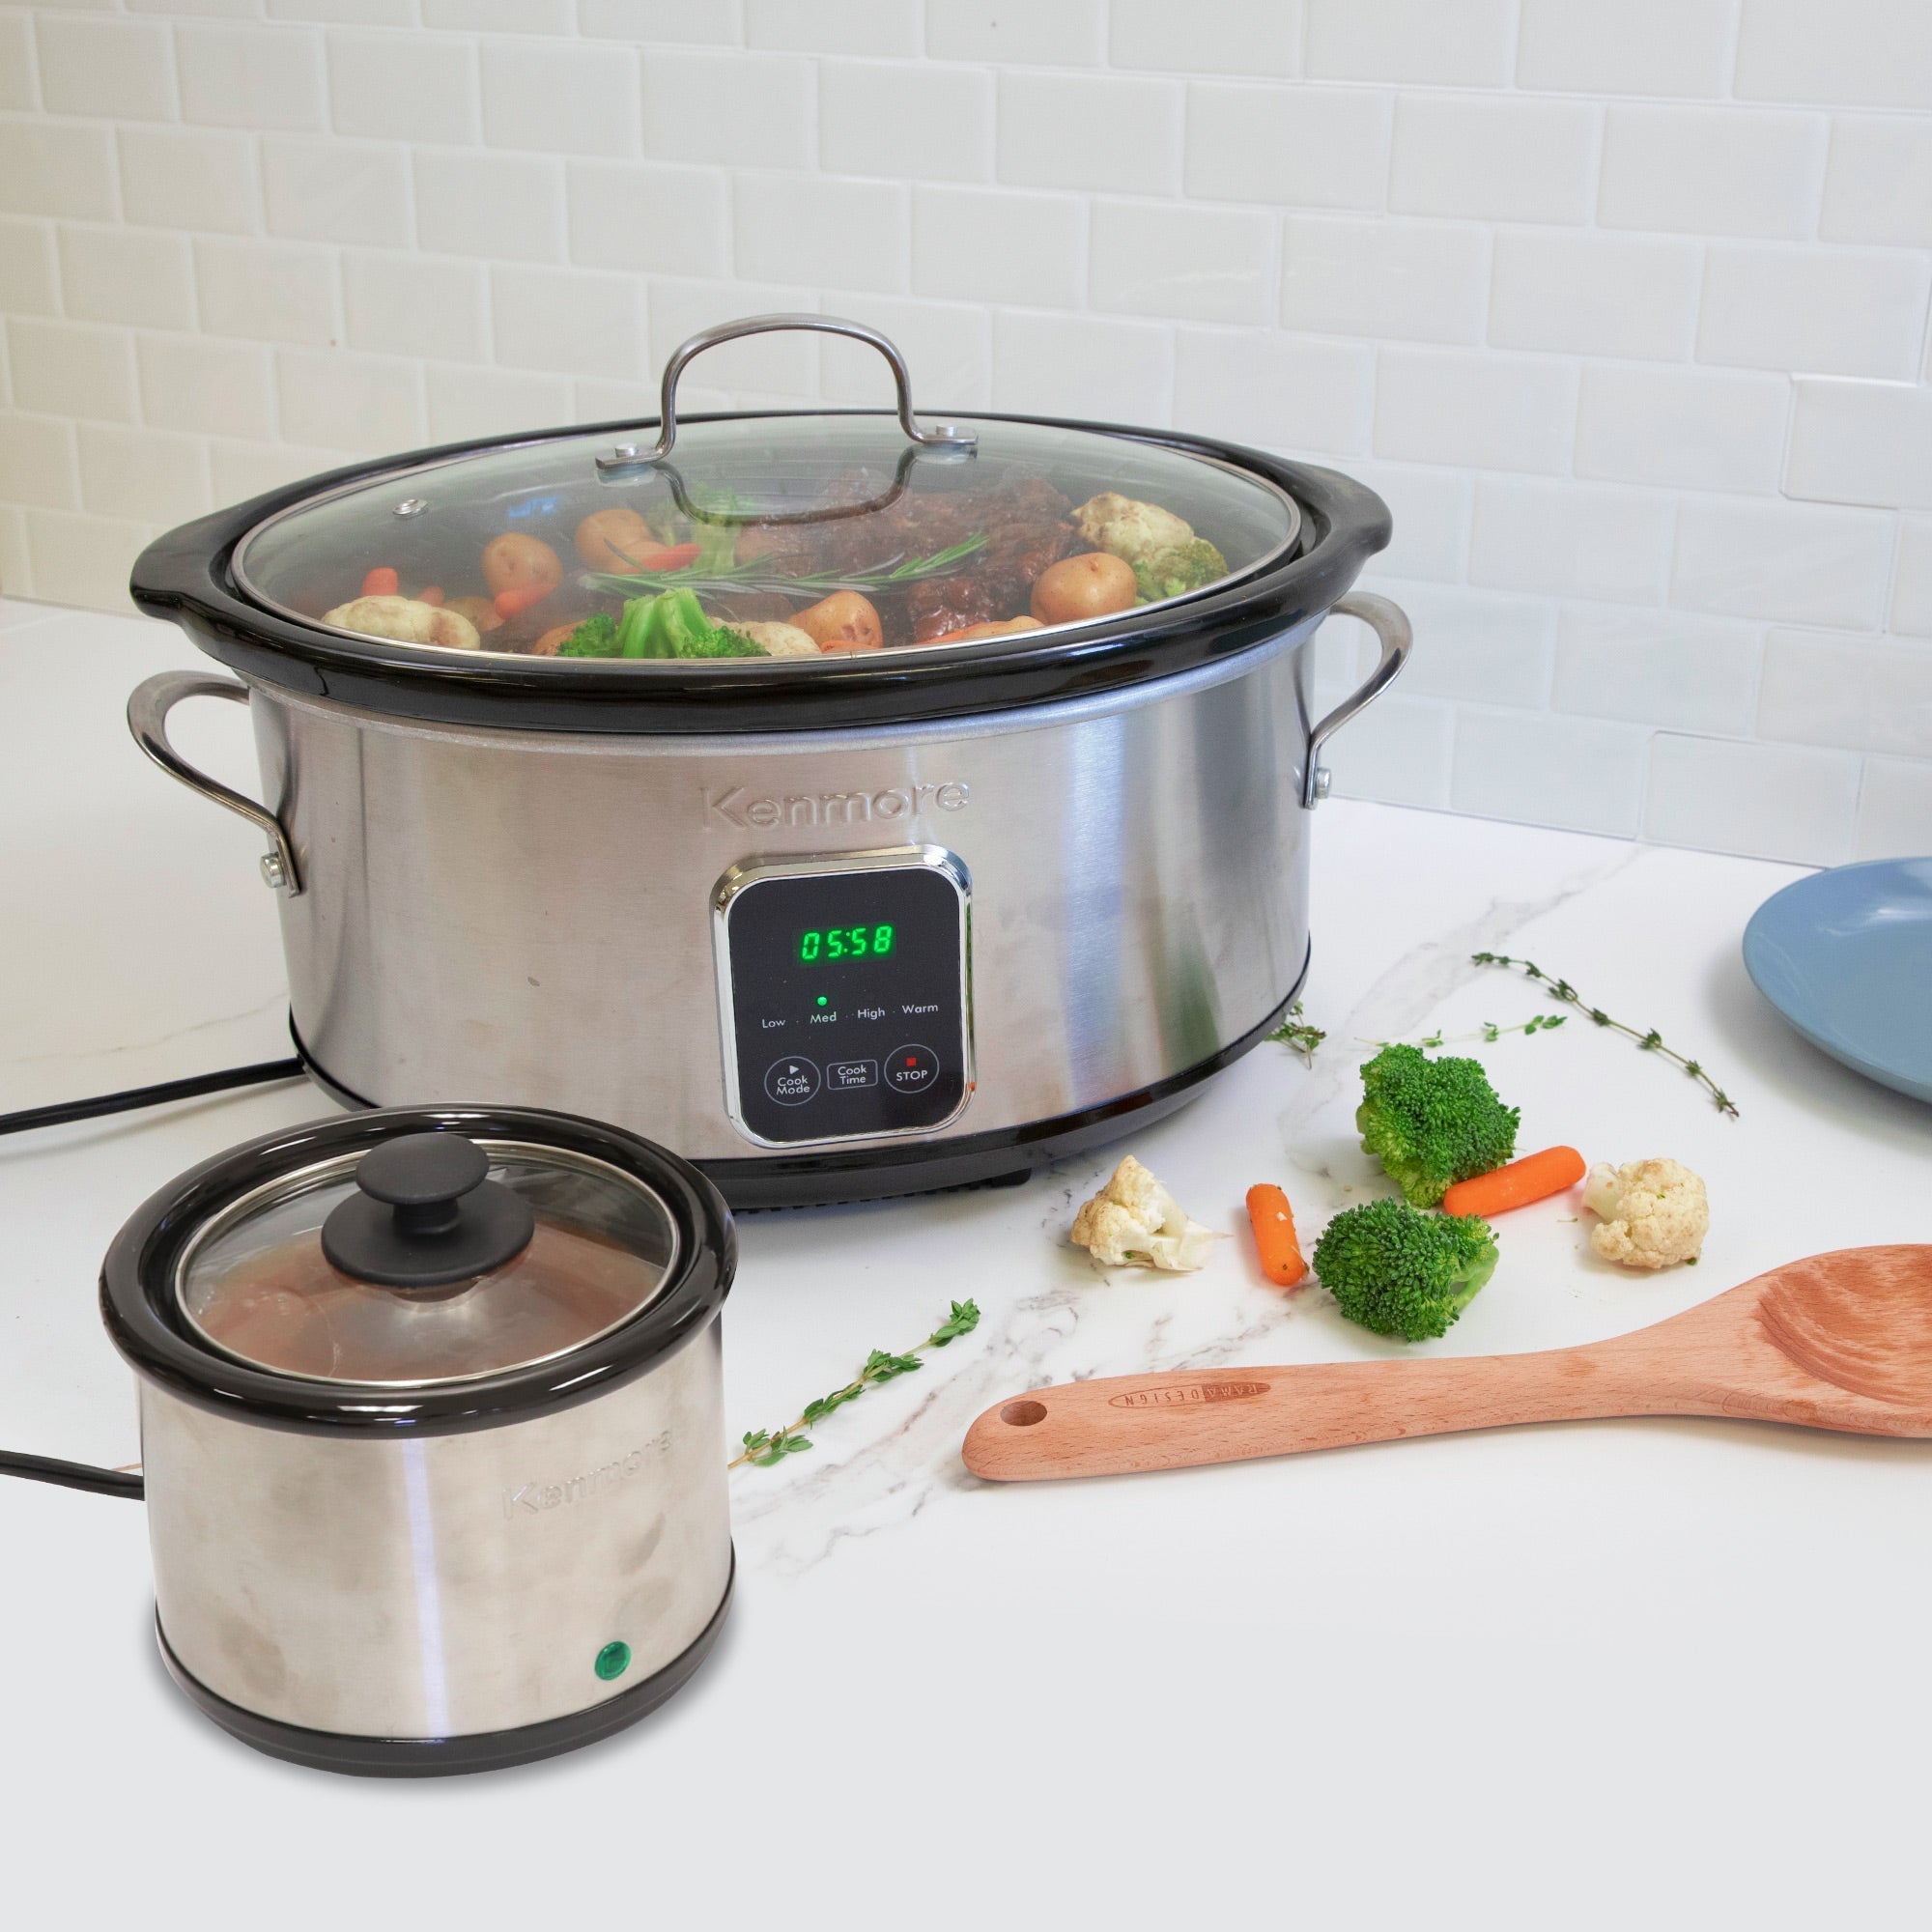 Kenmore 7 qt programmable slow cooker and sauce warmer on a white marbled countertop with white tile backsplash behind. The slow cooker contains a roast and vegetables and there are pieces of broccoli and carrots, fresh thyme sprigs, and a wooden spoon on the counter beside it